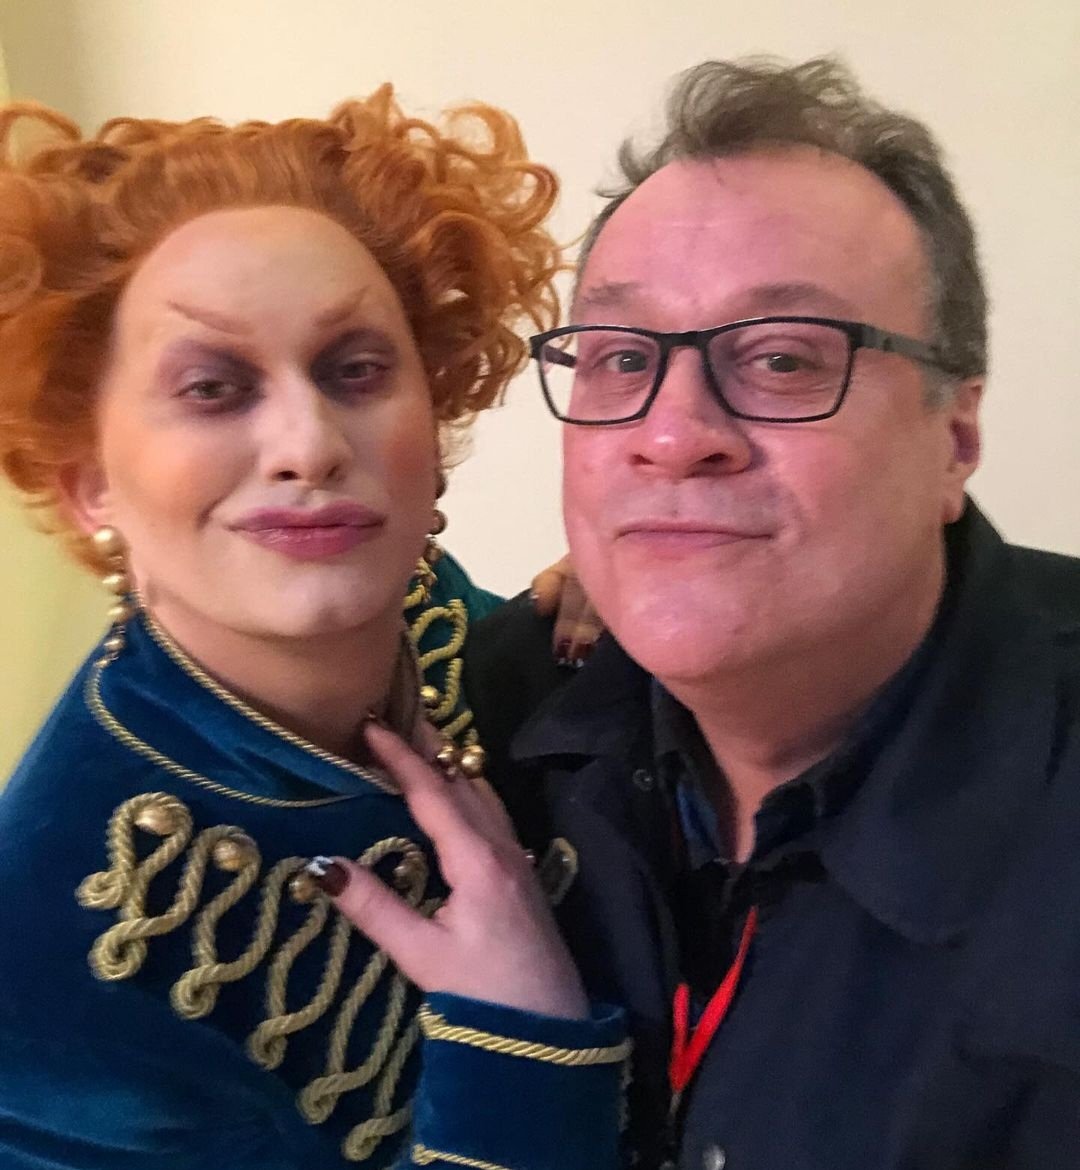 'I have never seen an actor work harder and more diligently, and with so much imagination. It's got so much nerve, so much boldness. I can see people shivering in the face of this performance. Go and shiver, this is epic.'

- Russell T Davies on Jinkx Monsoon's role as Maestro.